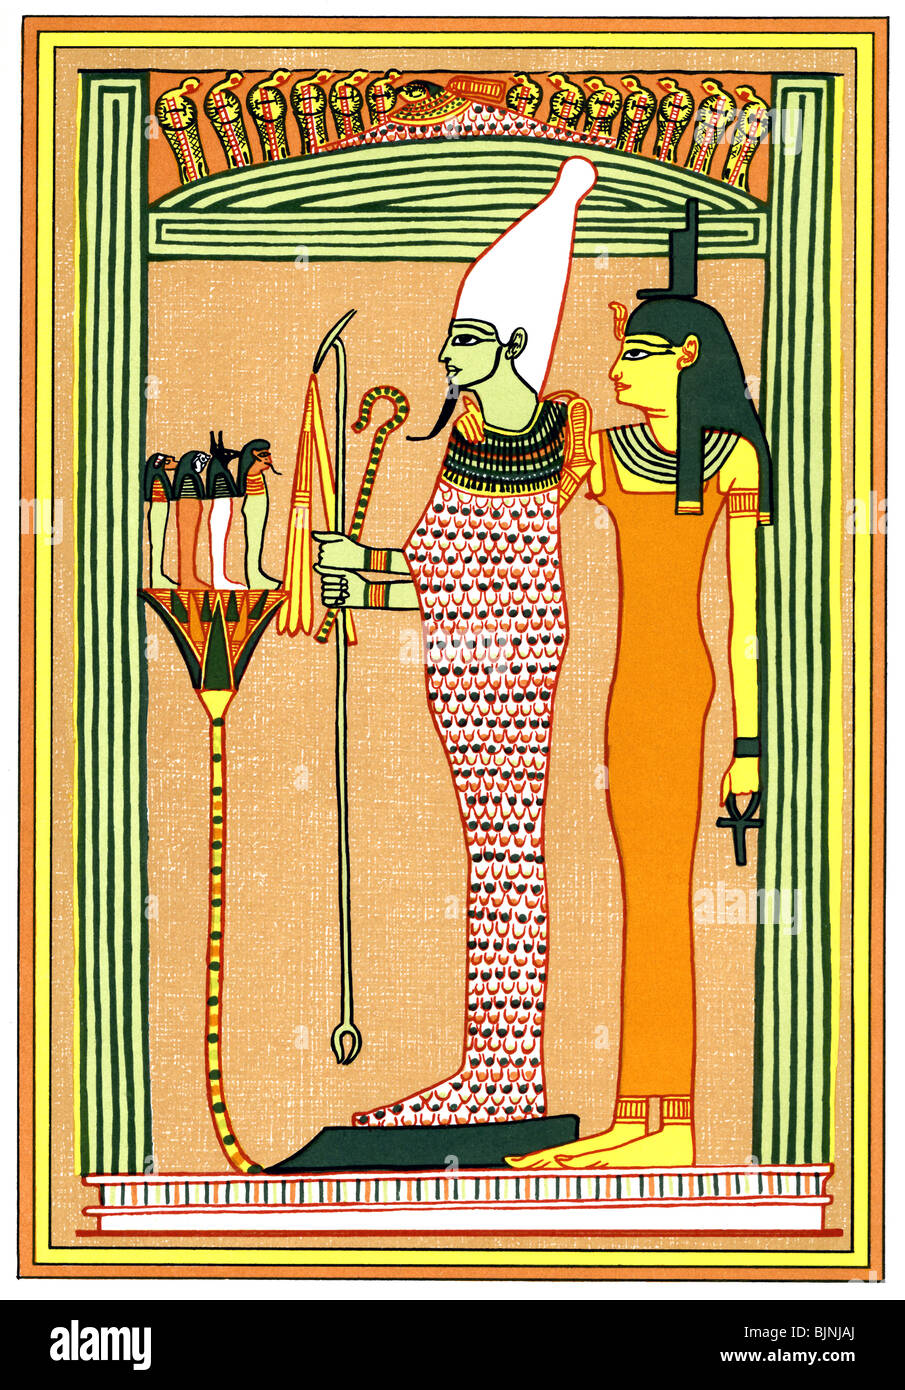 Osiris, the Egyptian god of fertility and of the dead, wears the white crown of Upper Egypt and holds the scepter, crook, flail. Stock Photo